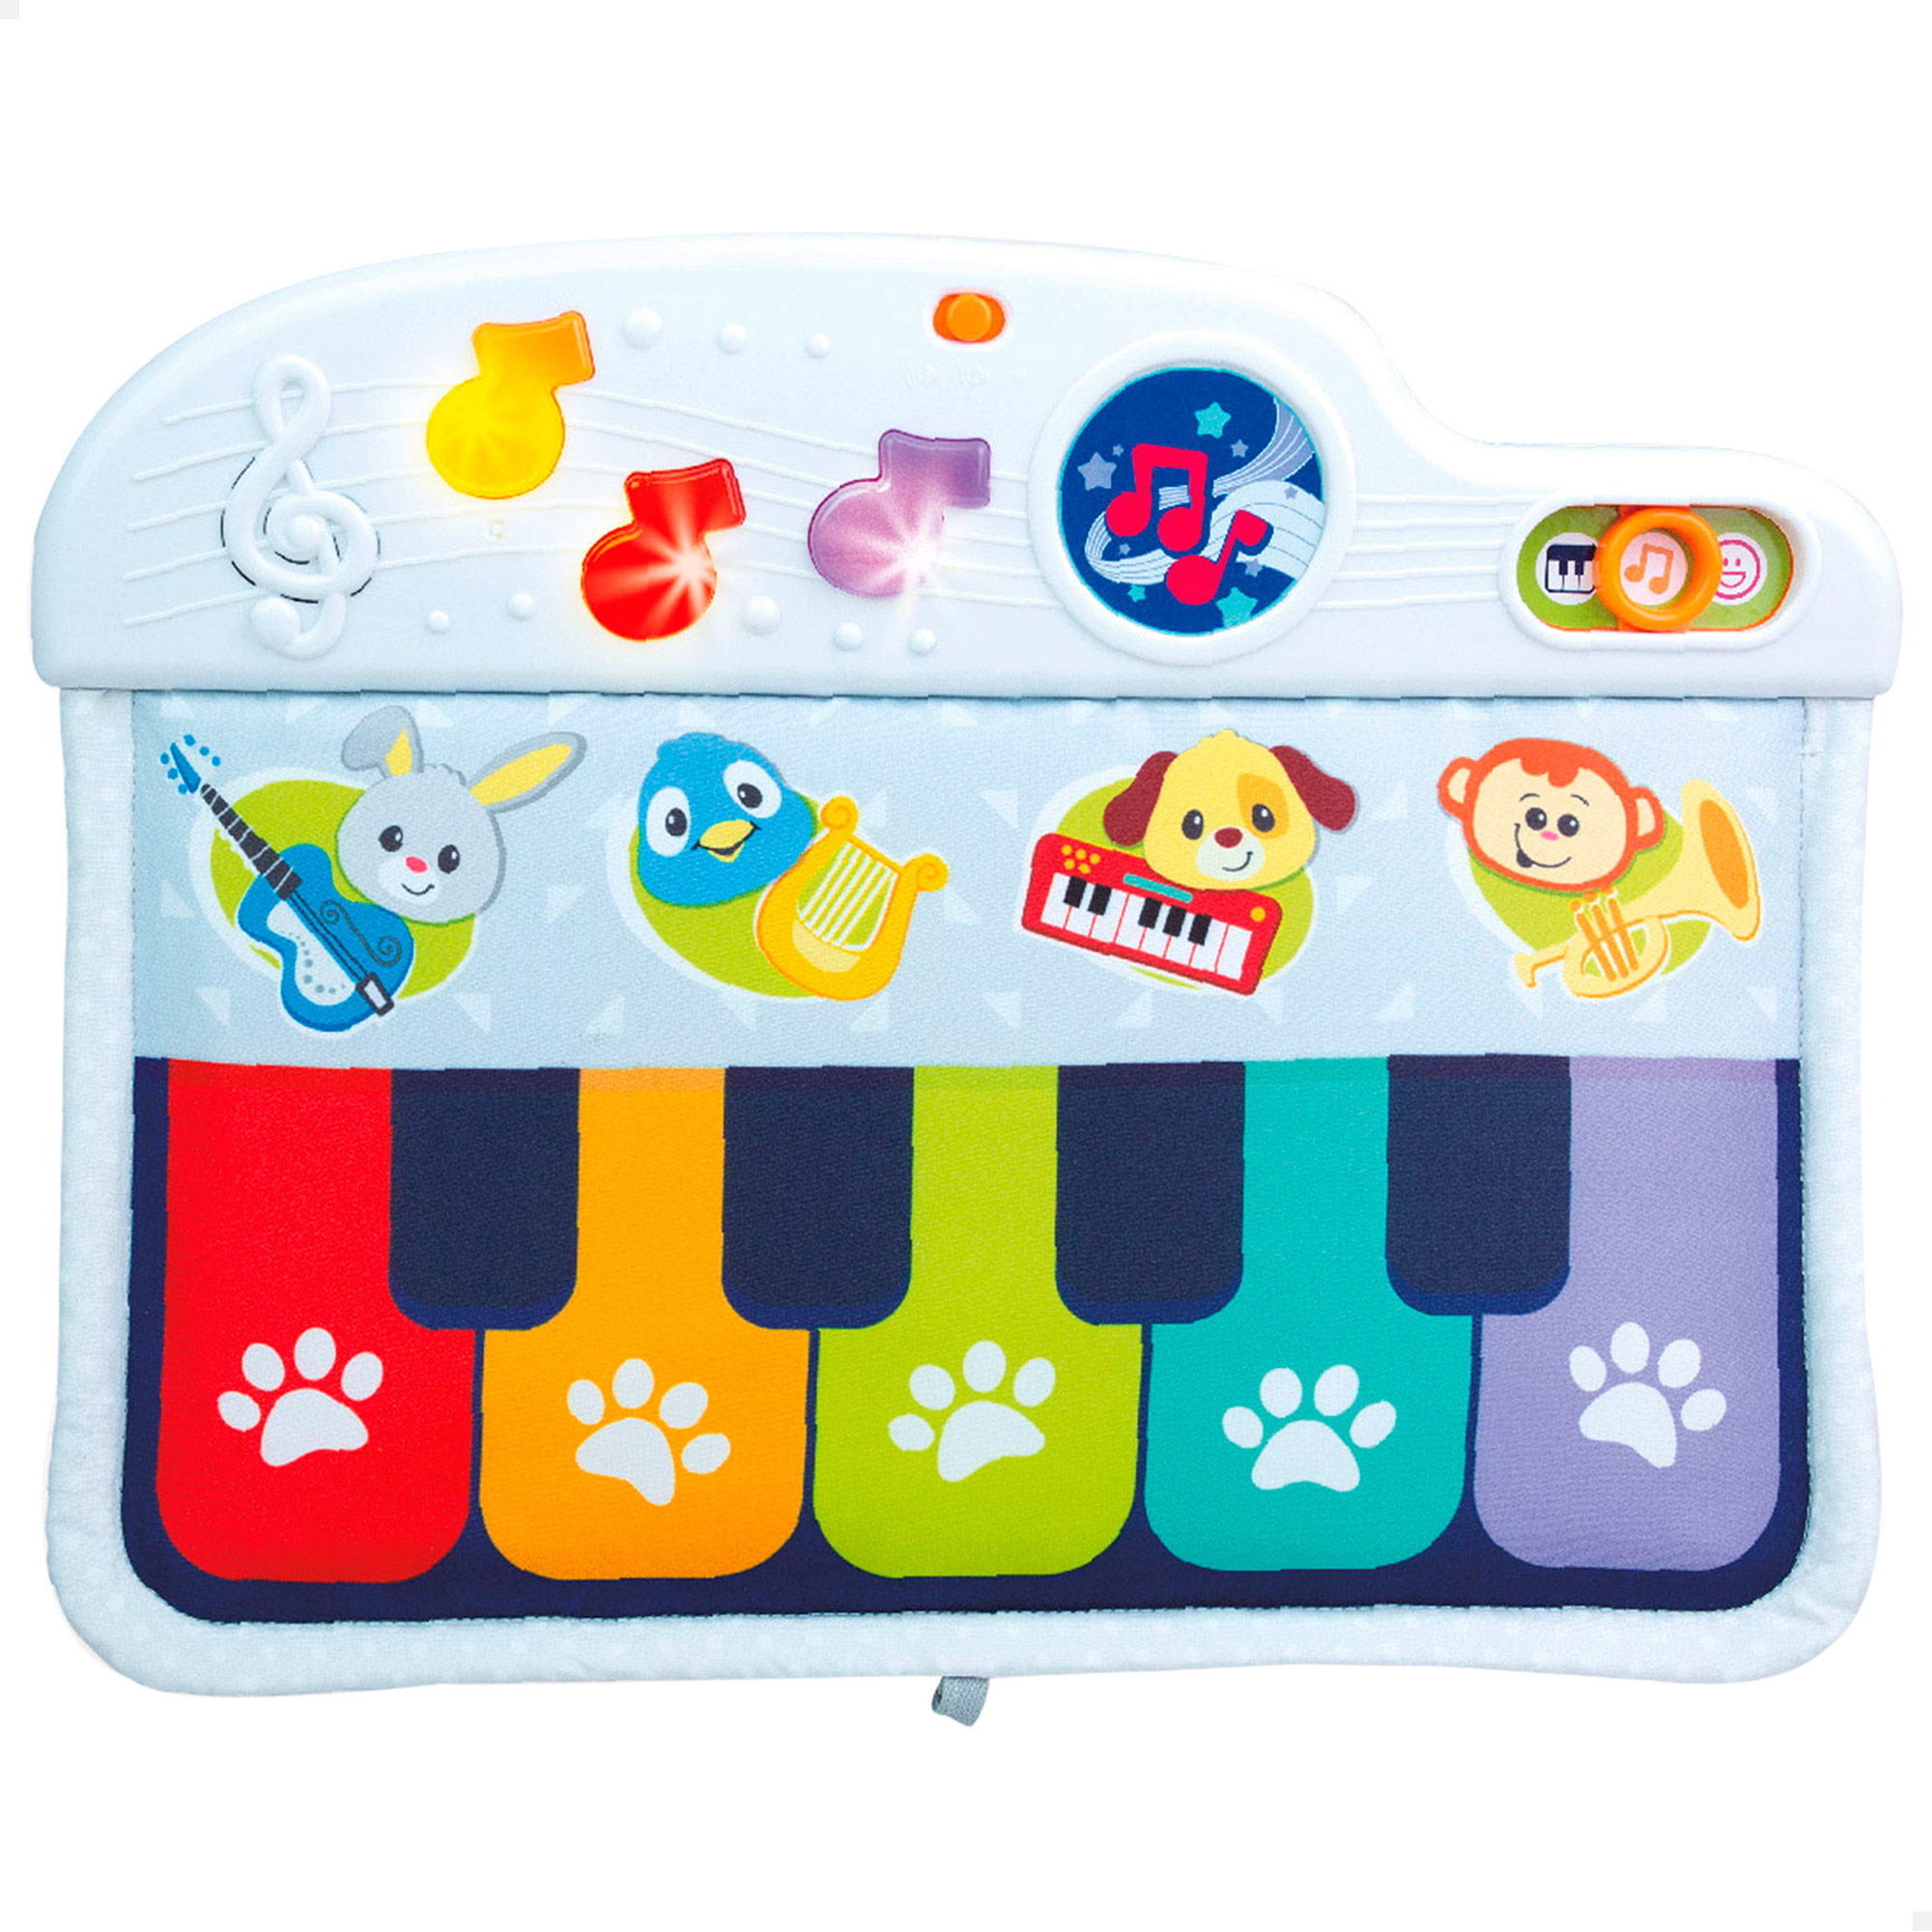 PIANO CUNA ANIMALES MELODIAS 46878 - N102623